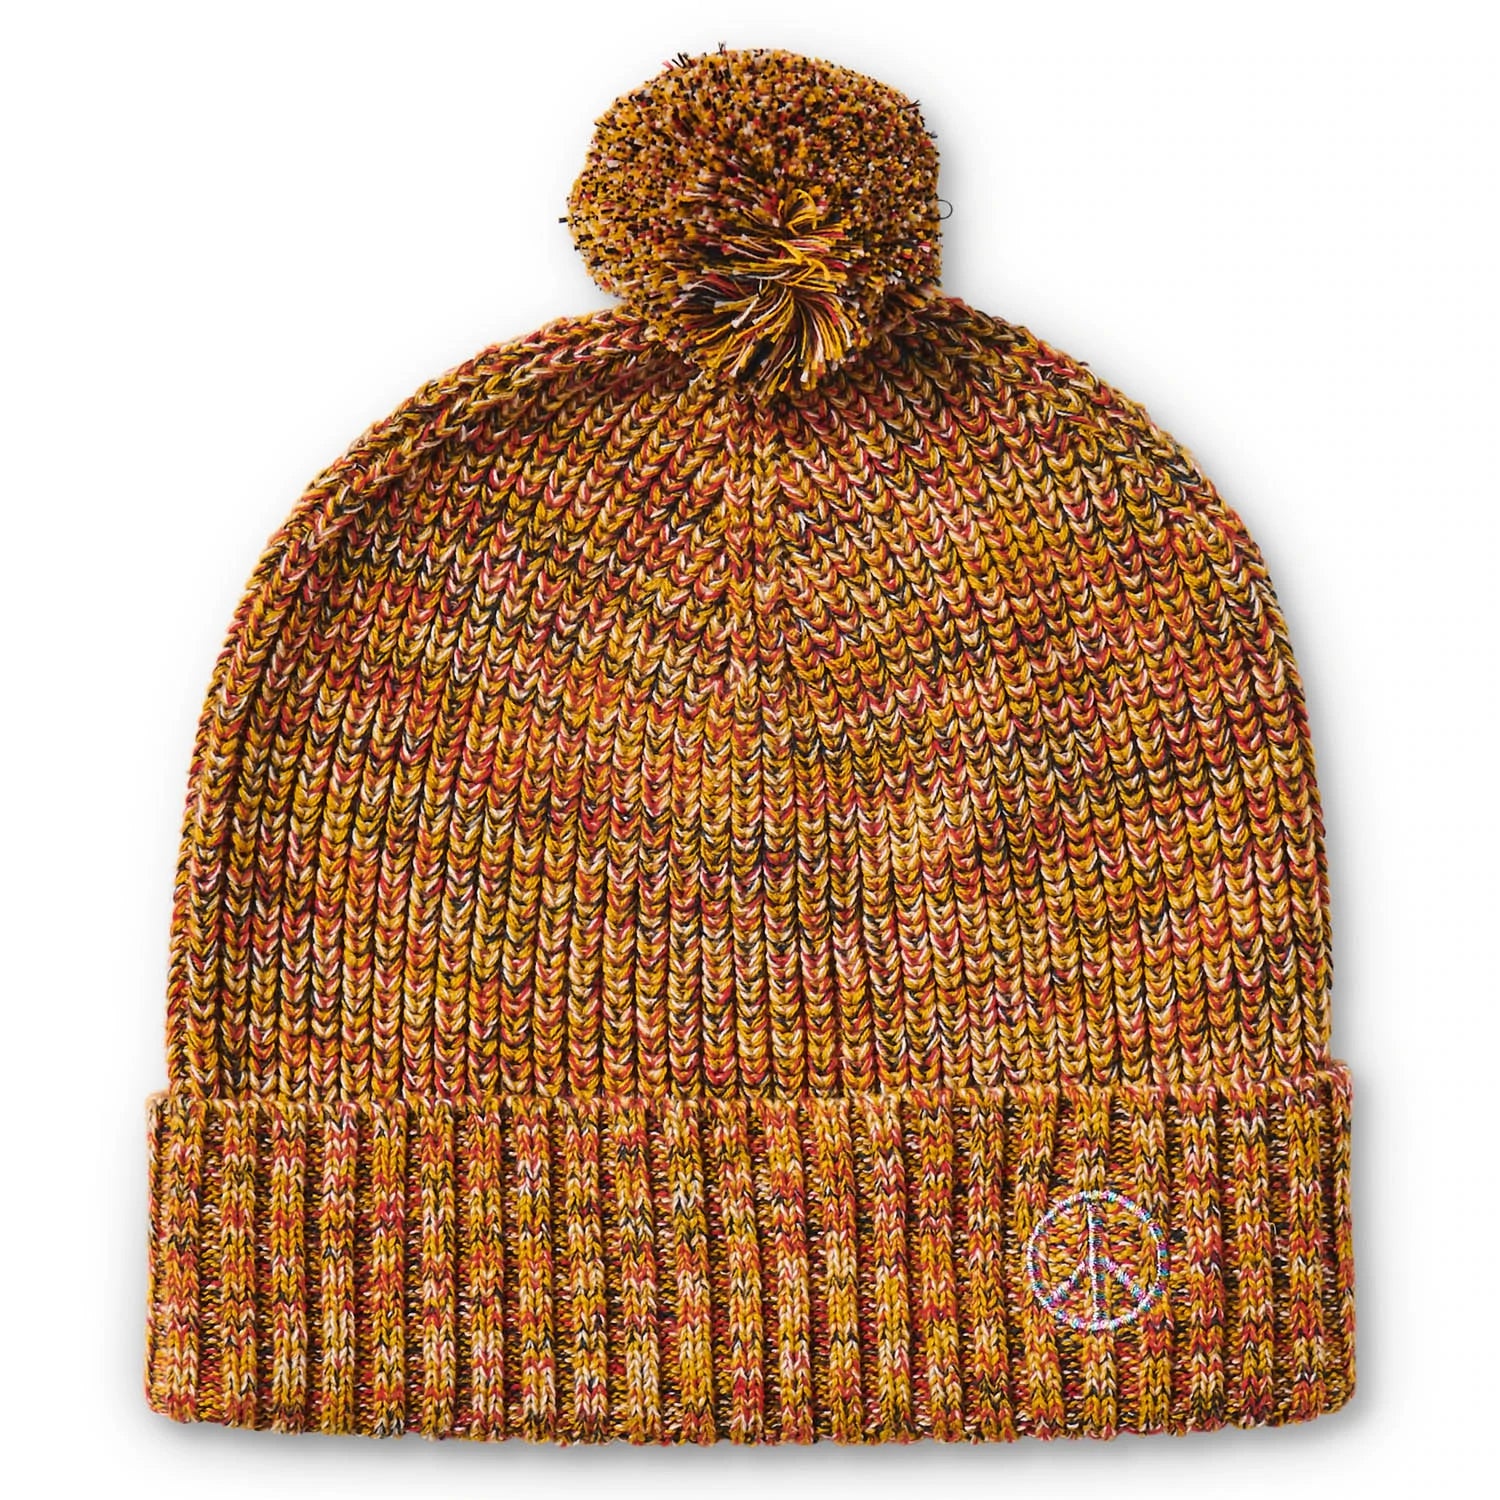 SUMAC CABLE KNITTED BEANIE